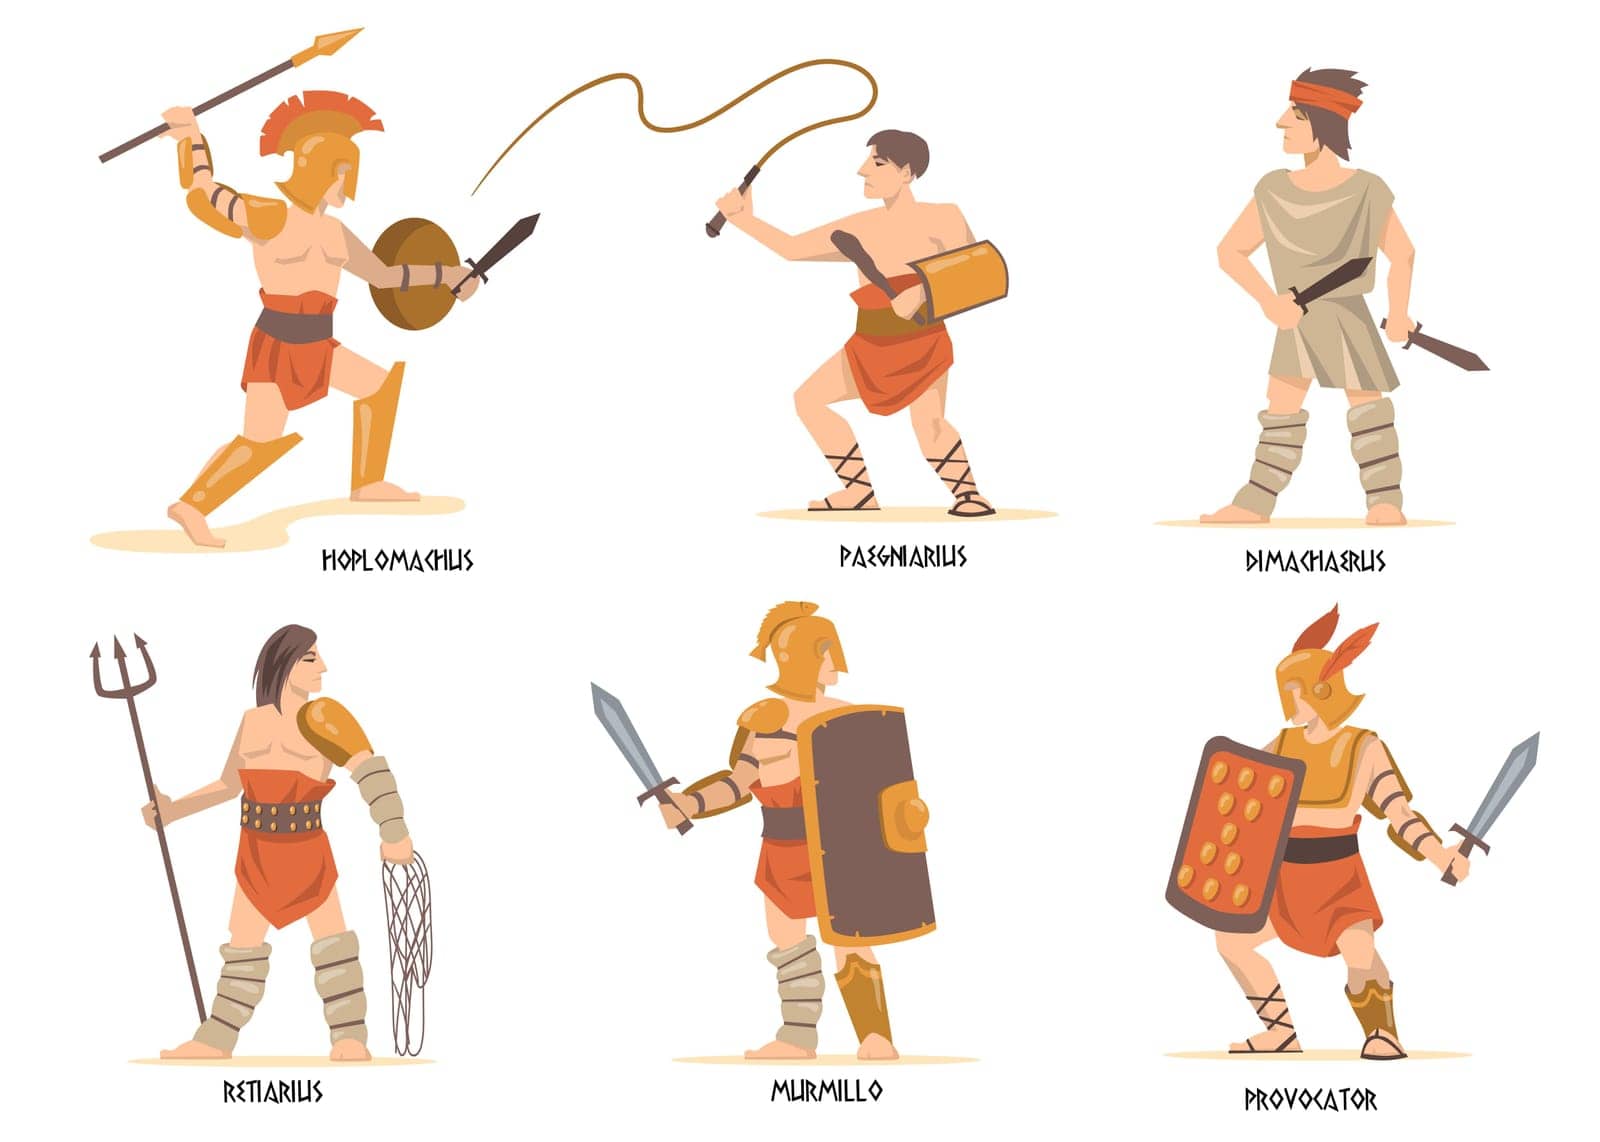 Gladiators characters set. Ancient Roman and Greek warriors, mythology characters, Spartan soldiers with swords and shields. Vector illustration for history, empire, war, fight concept